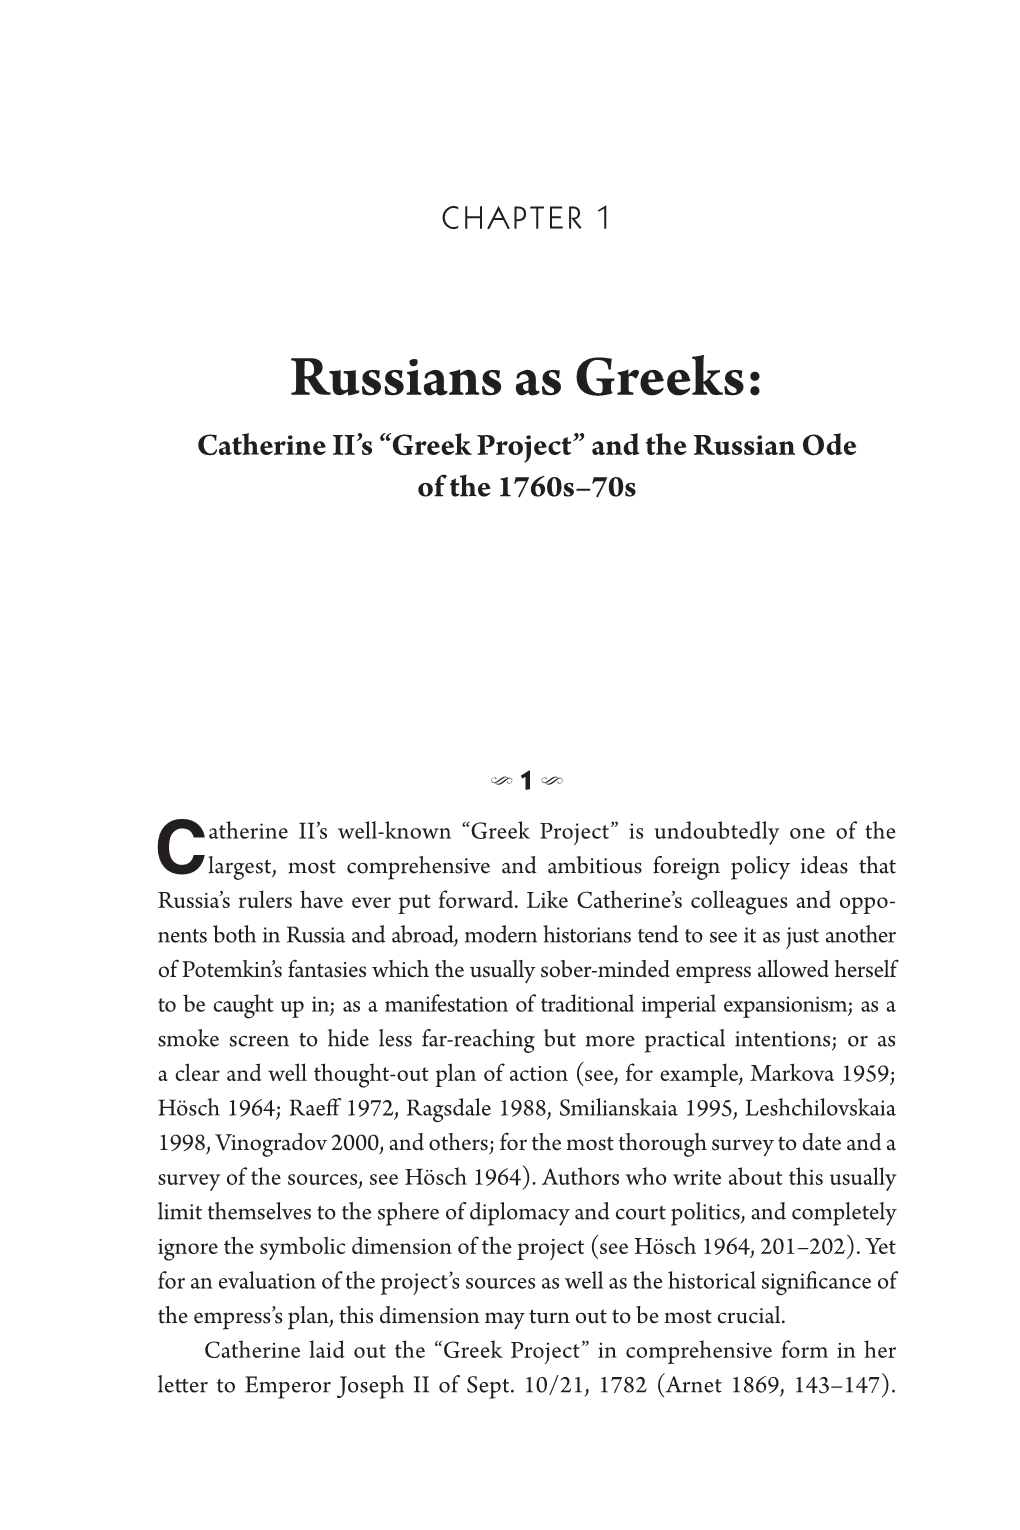 Russians As Greeks: Catherine II’S “Greek Project” and the Russian Ode of the 1760S–70S